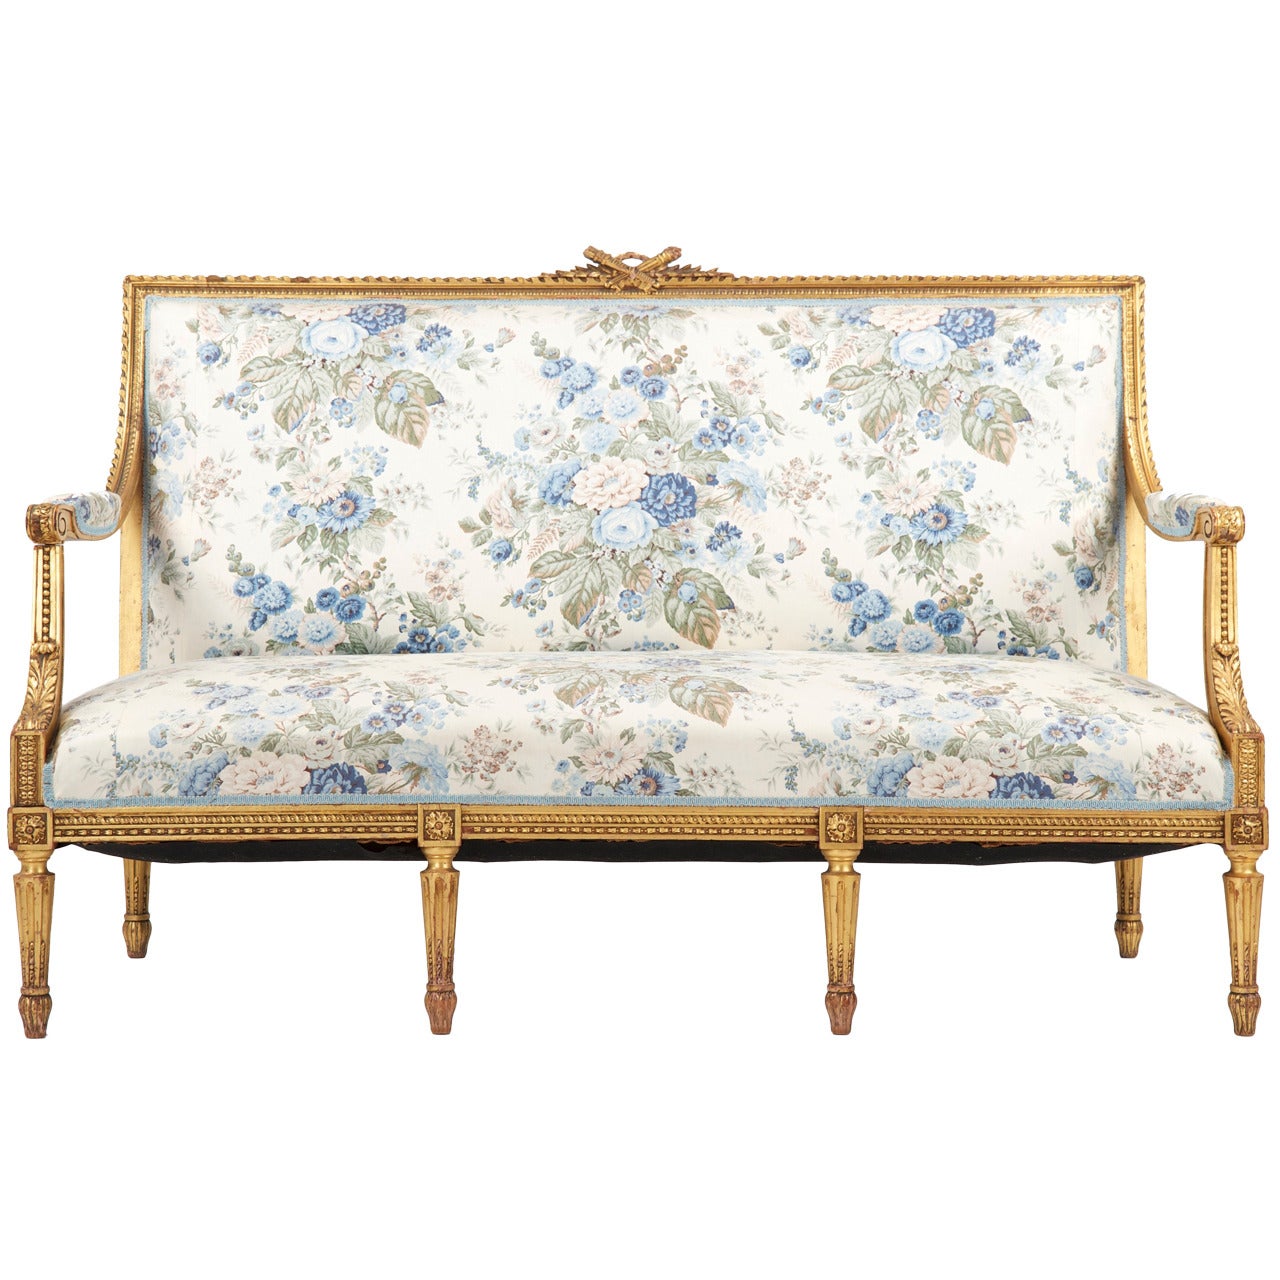 French Louis XVI Style Giltwood Antique Settee Sofa Canape c. 1900